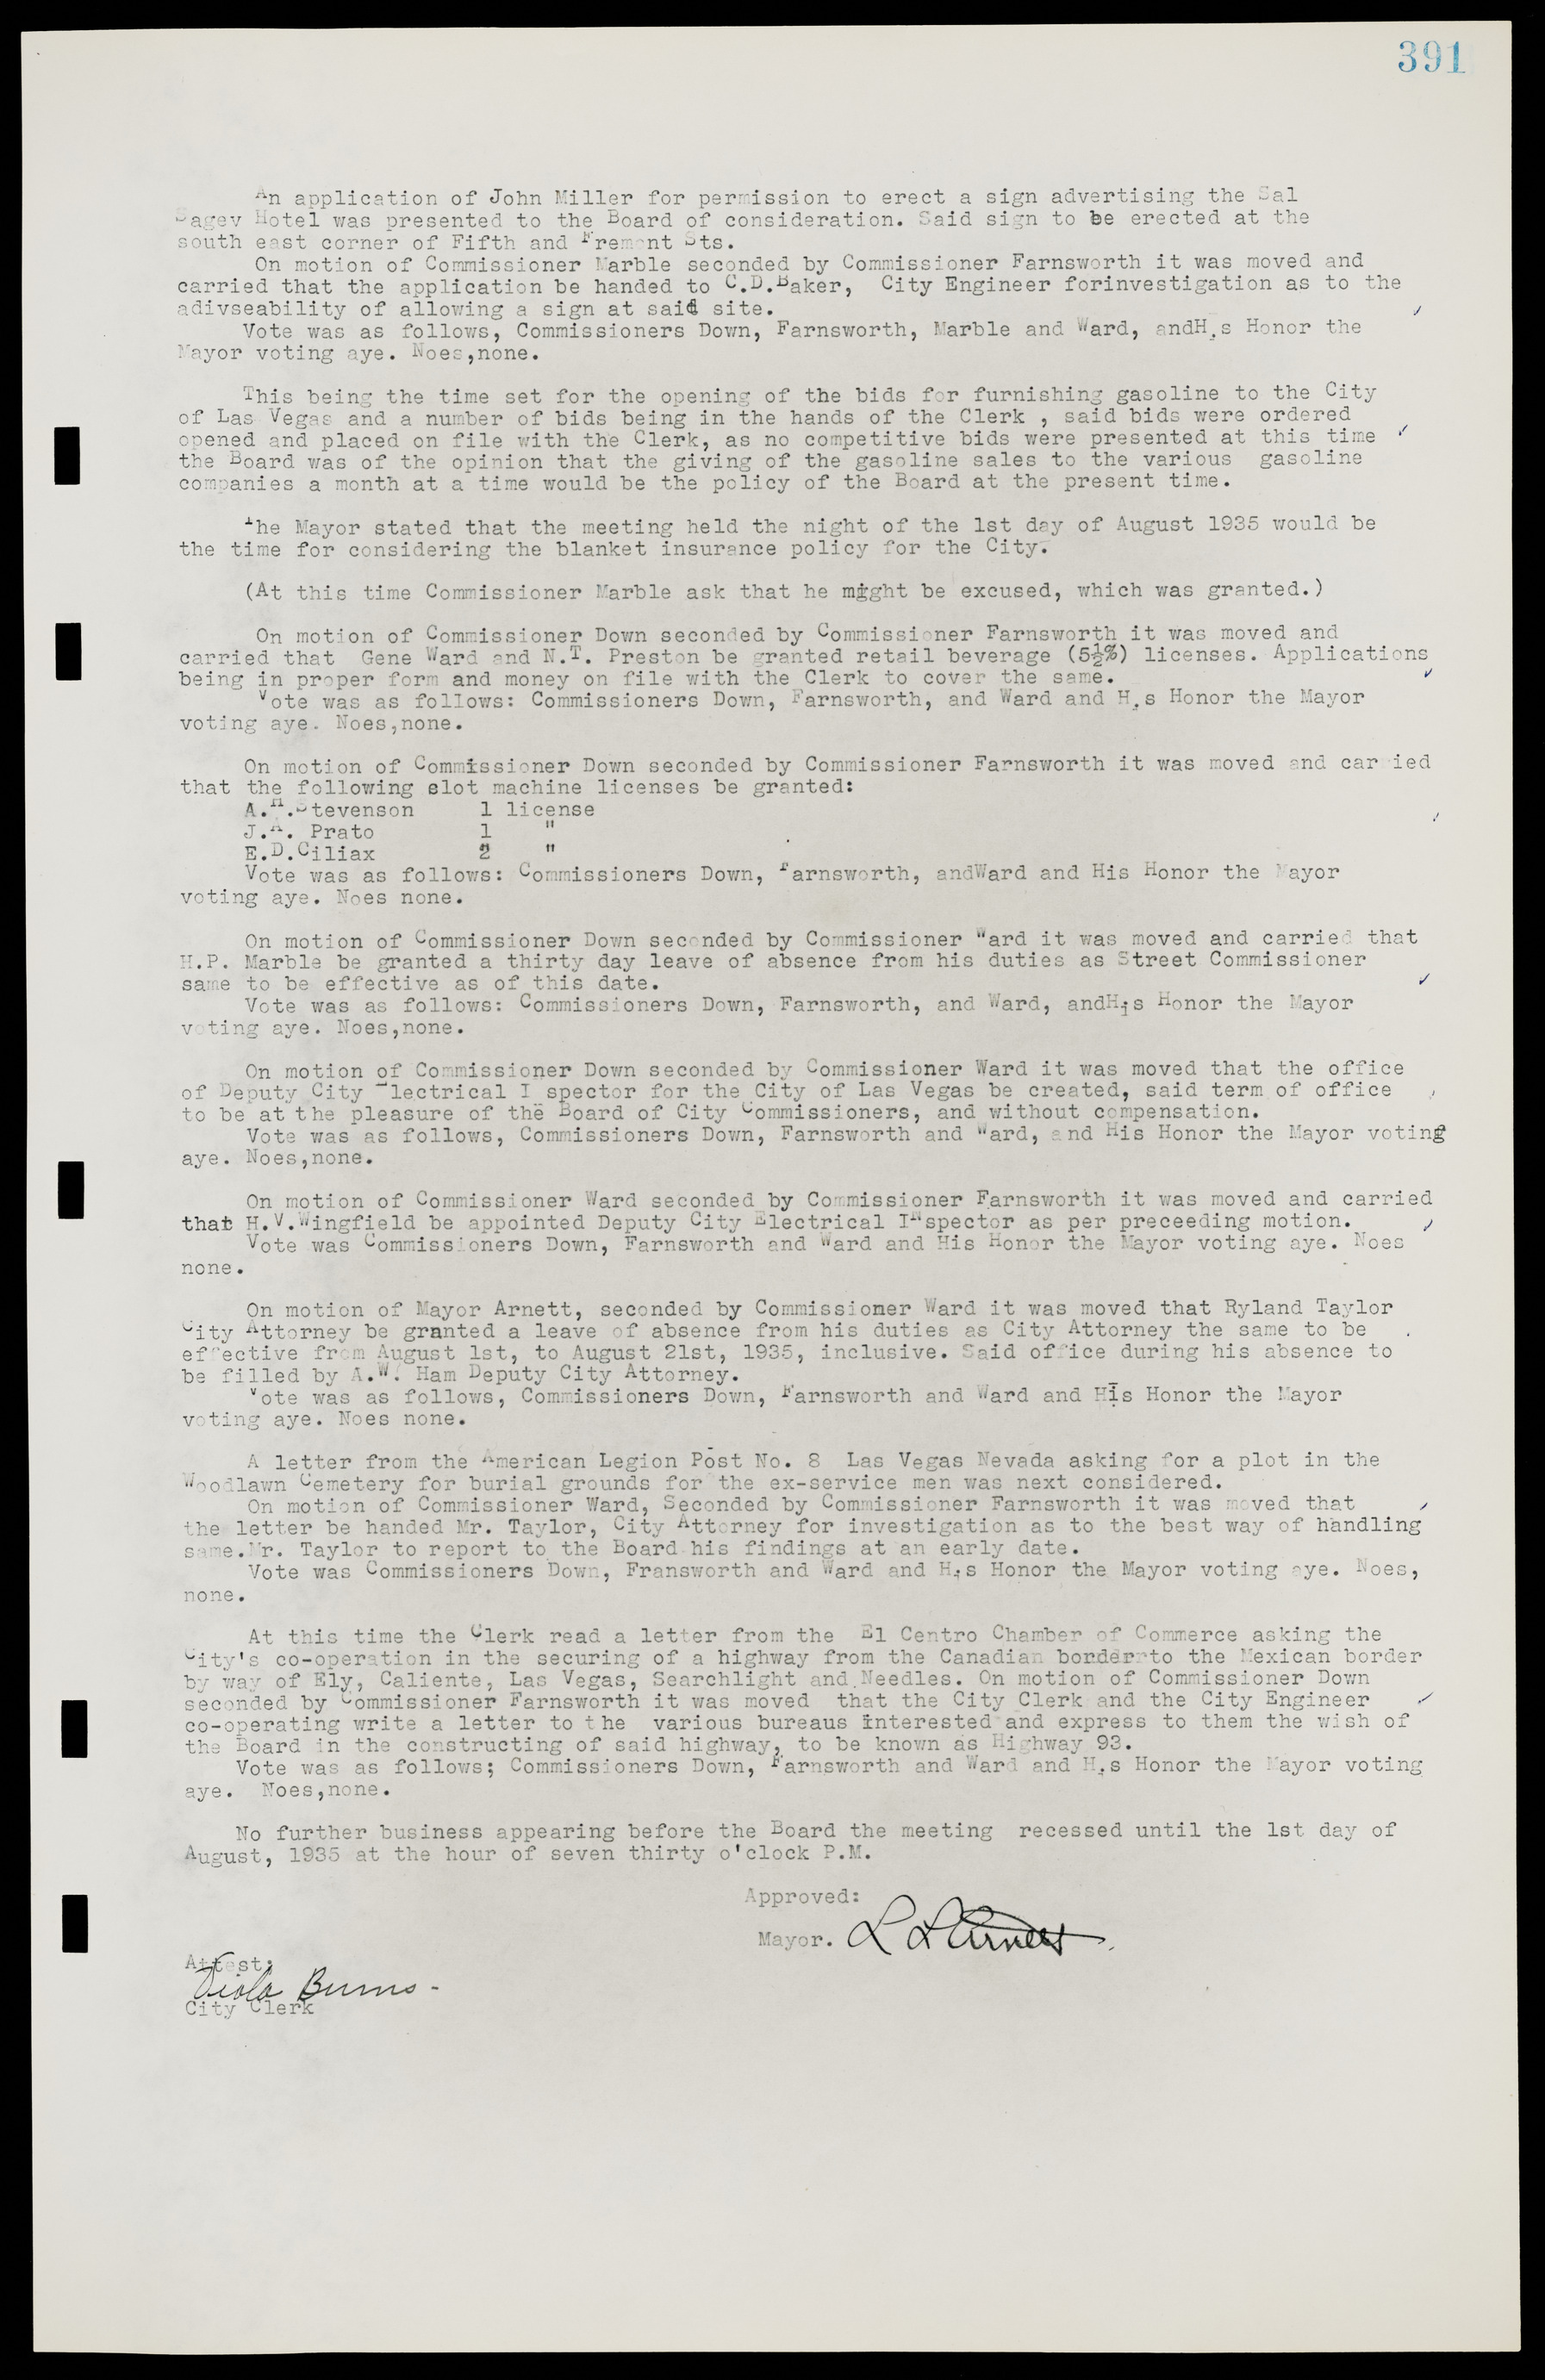 Las Vegas City Commission Minutes, May 14, 1929 to February 11, 1937, lvc000003-398